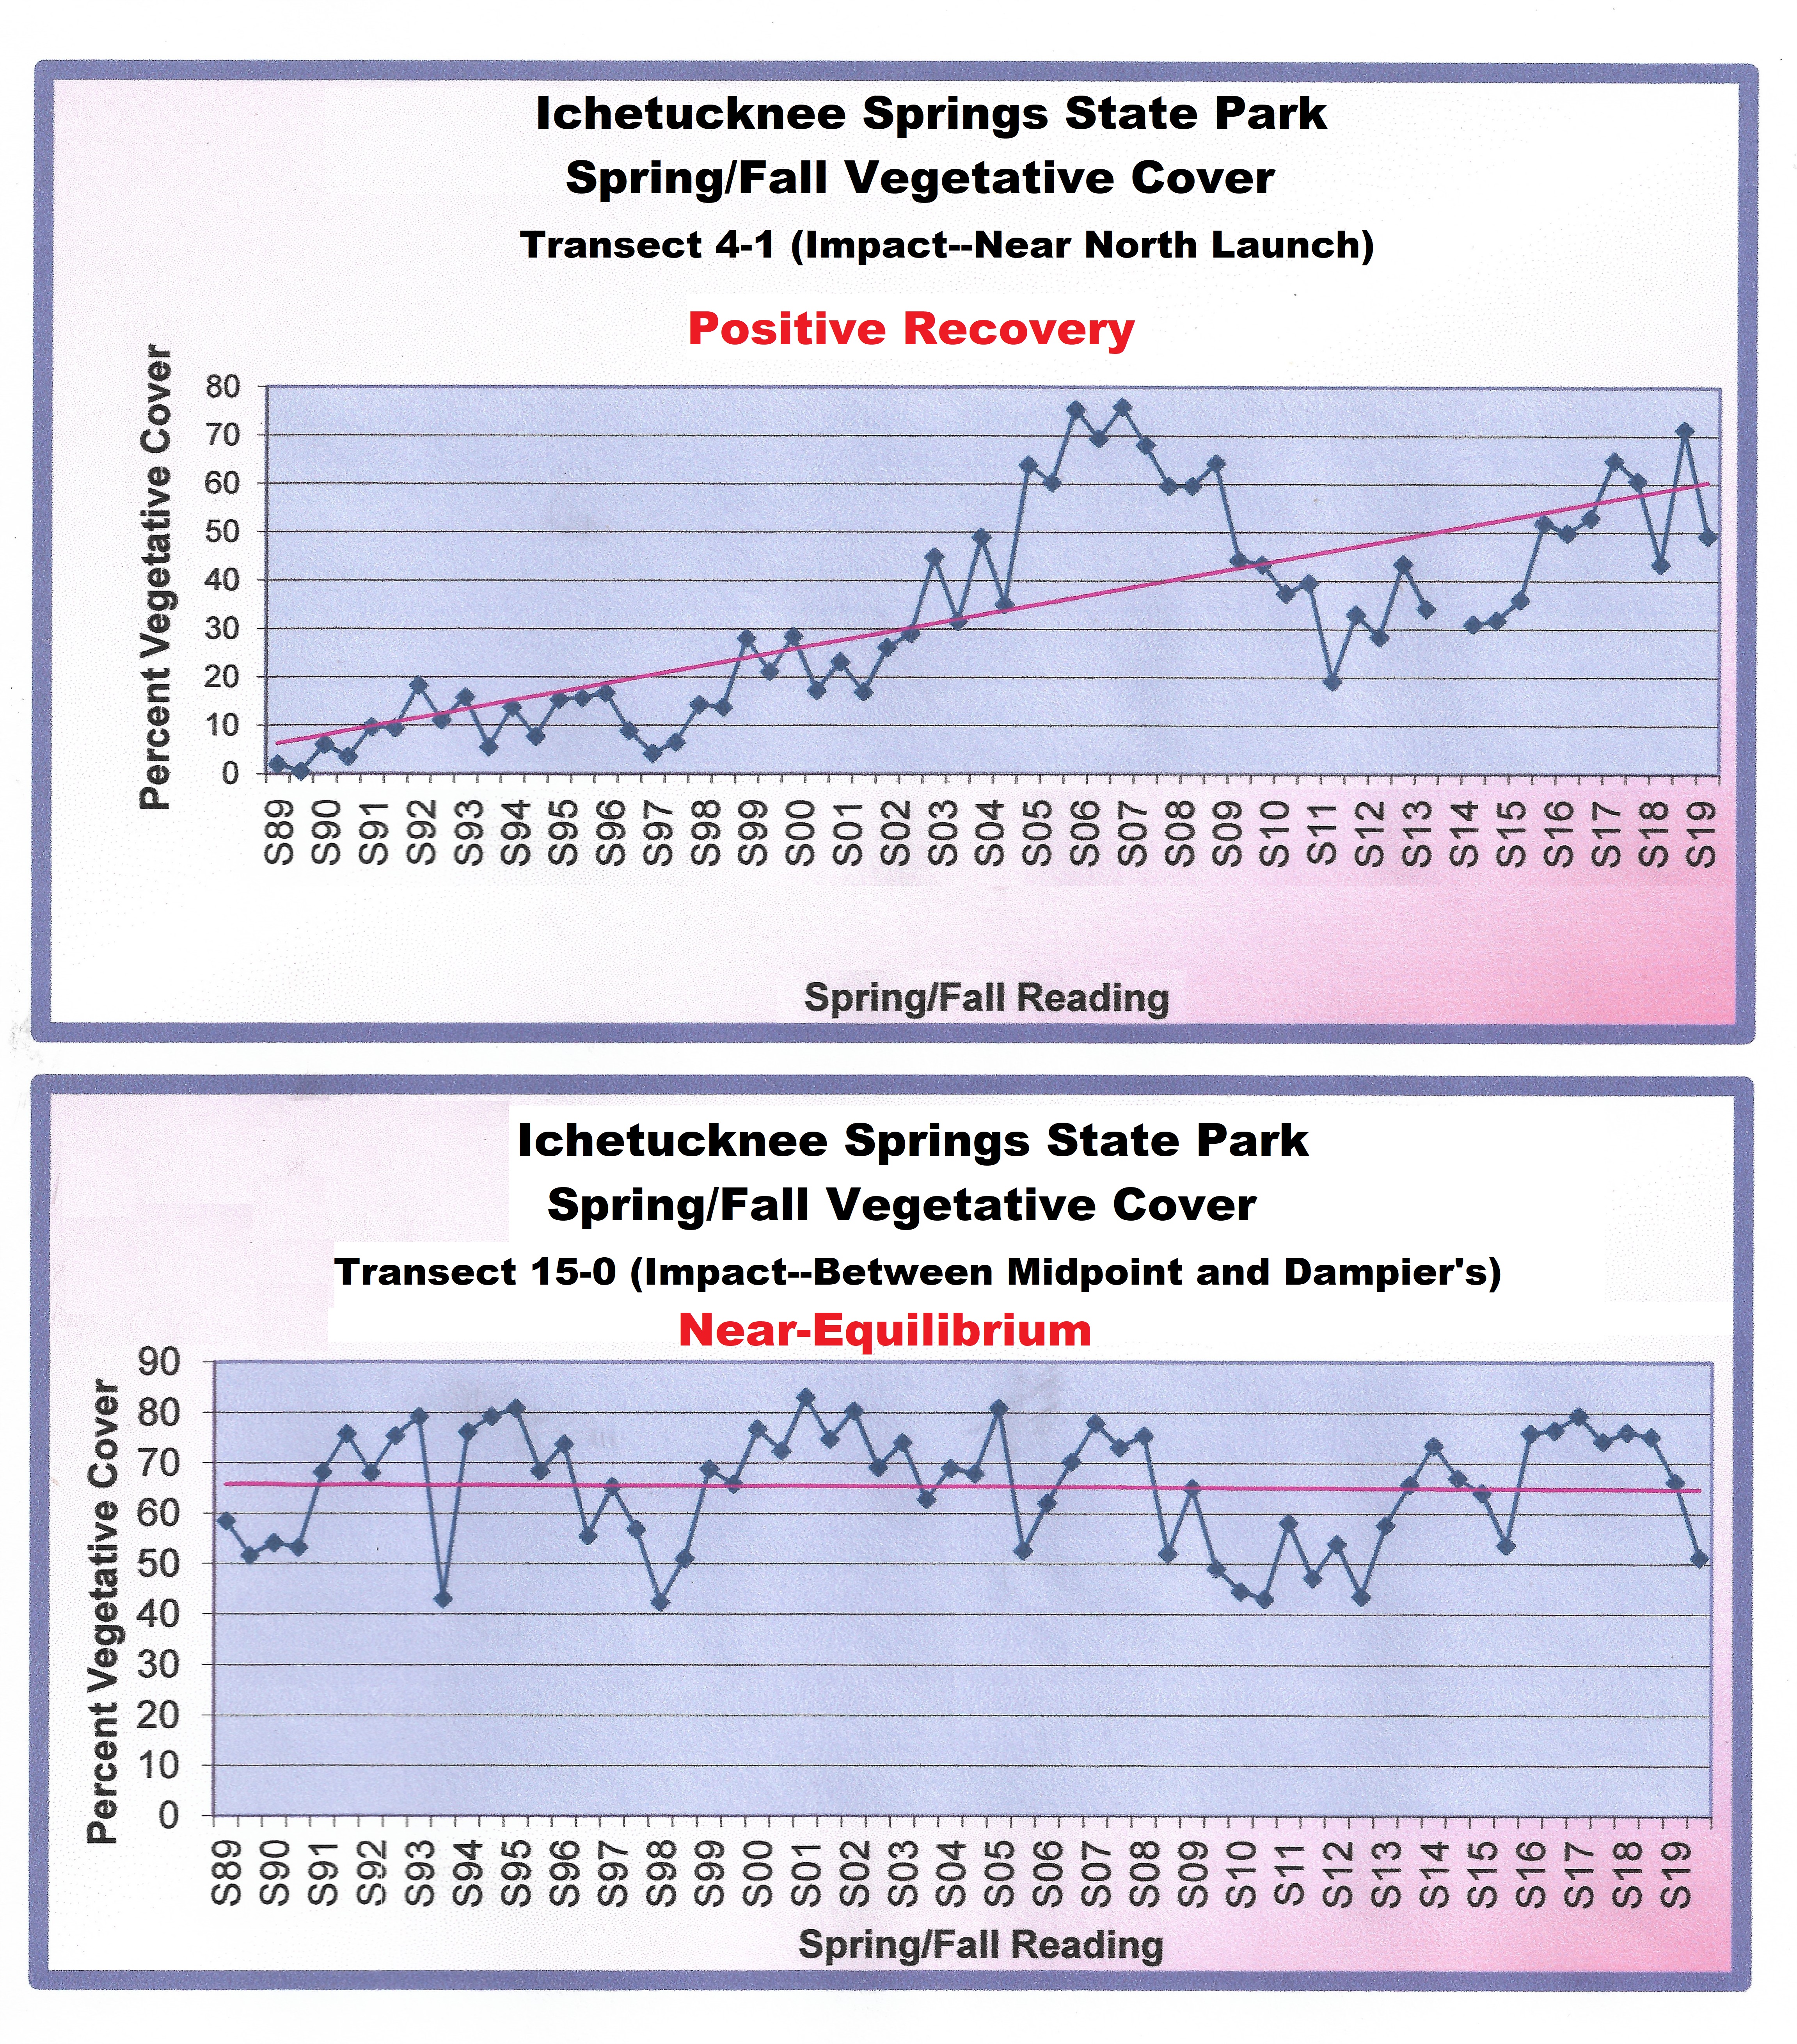 Two graphs showing the positive recovery and near-equilibrium between spring and fall over 19 years.